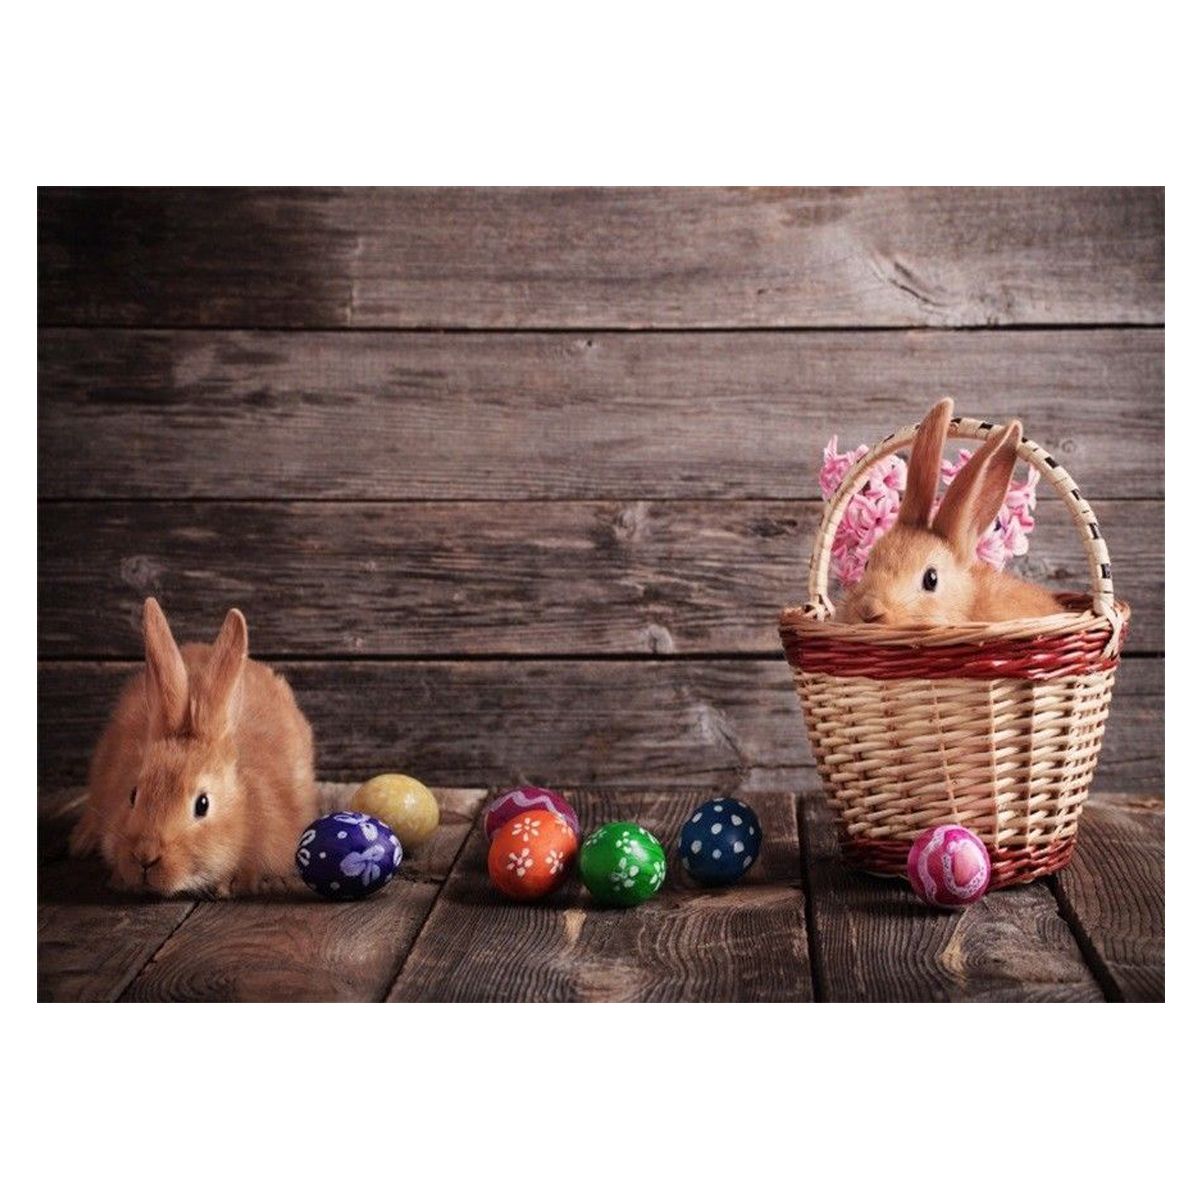 7x5FT-Cute-Rabbits-Easter-Eggs-Photography-Backdrop-Studio-Prop-Background-1392170